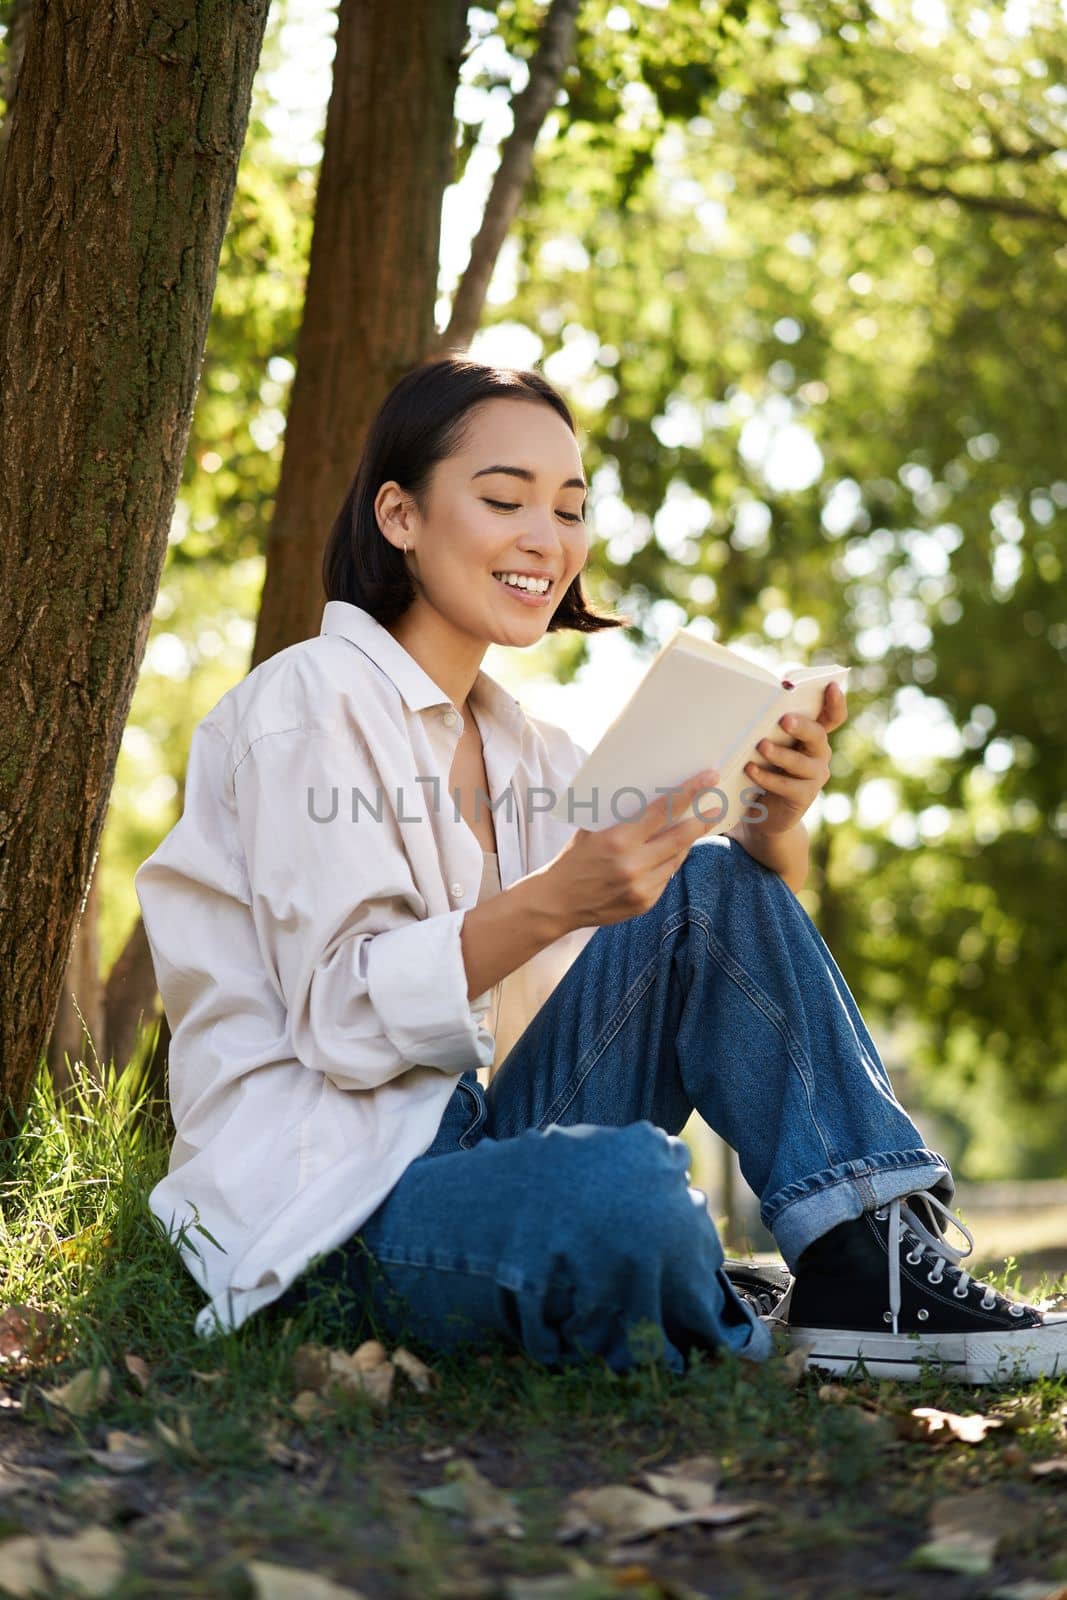 Beautiful young asian girl, student sits in park under tree and reading book, smiling, enjoying warm summer day outdoors.